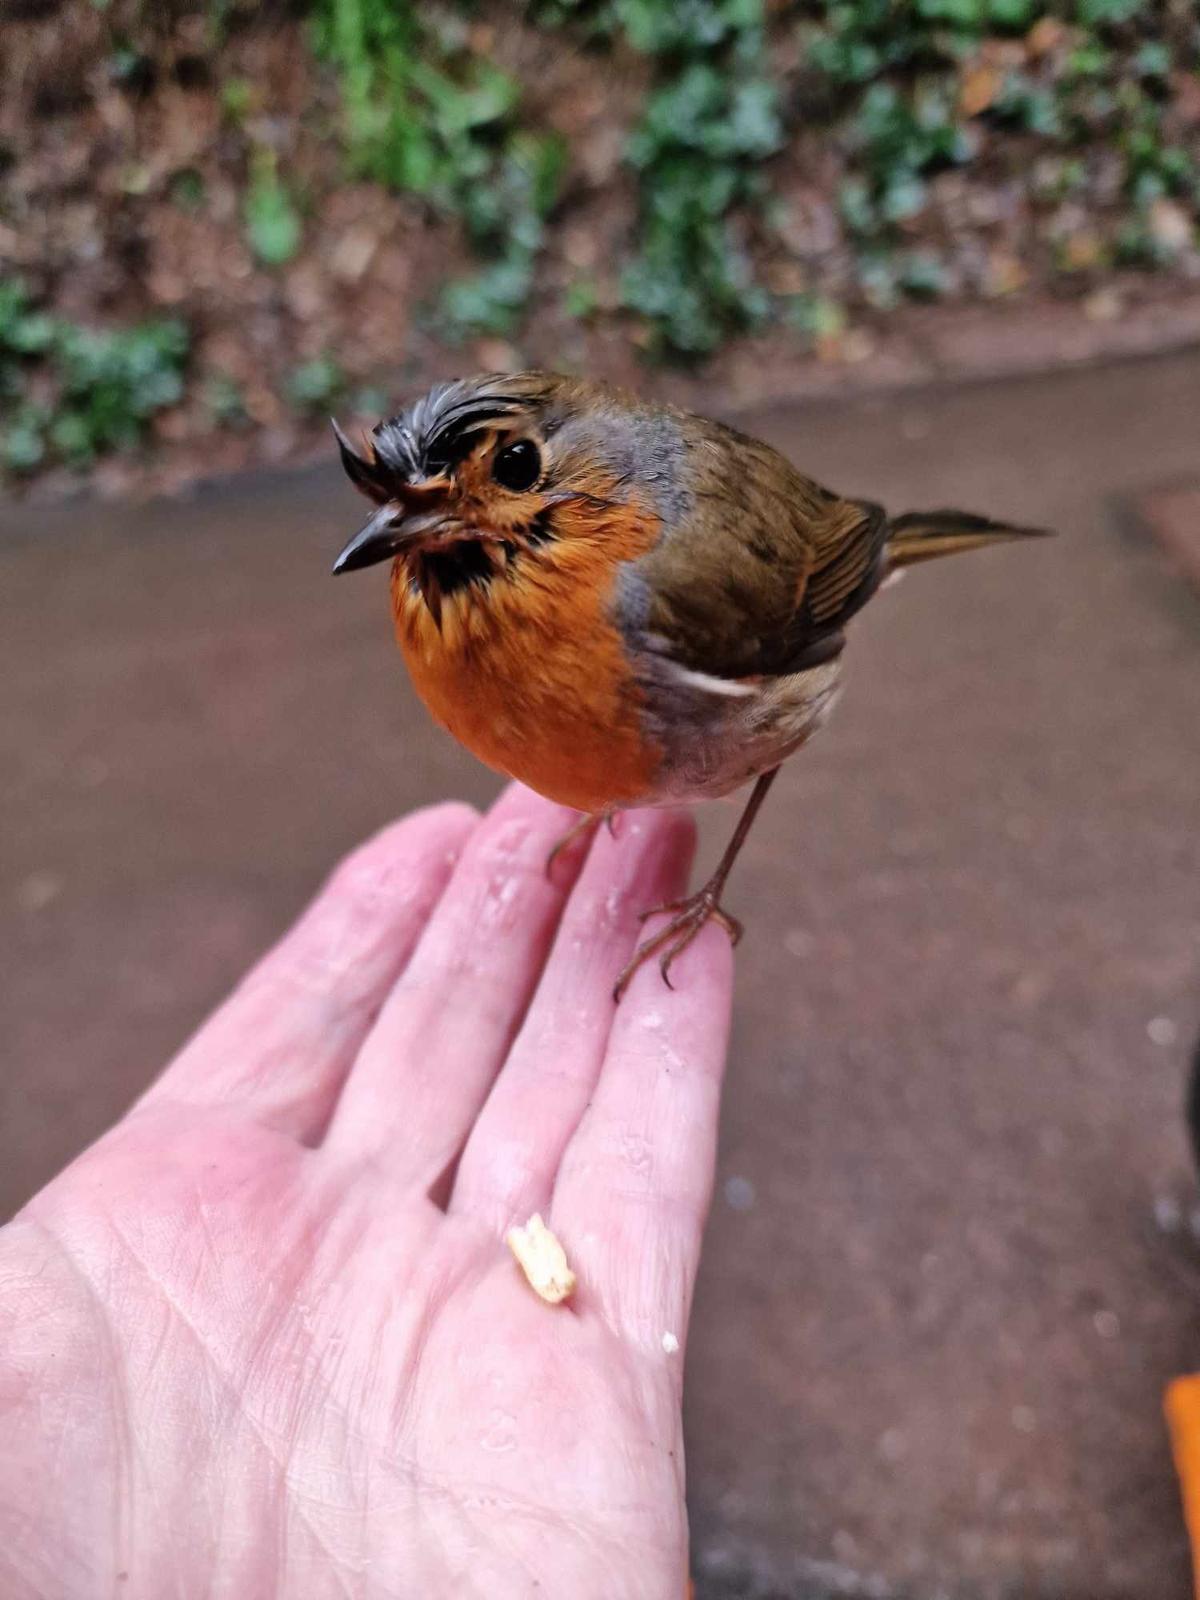 The robin that Ms. Kiff fed now visits her regularly. (SWNS)